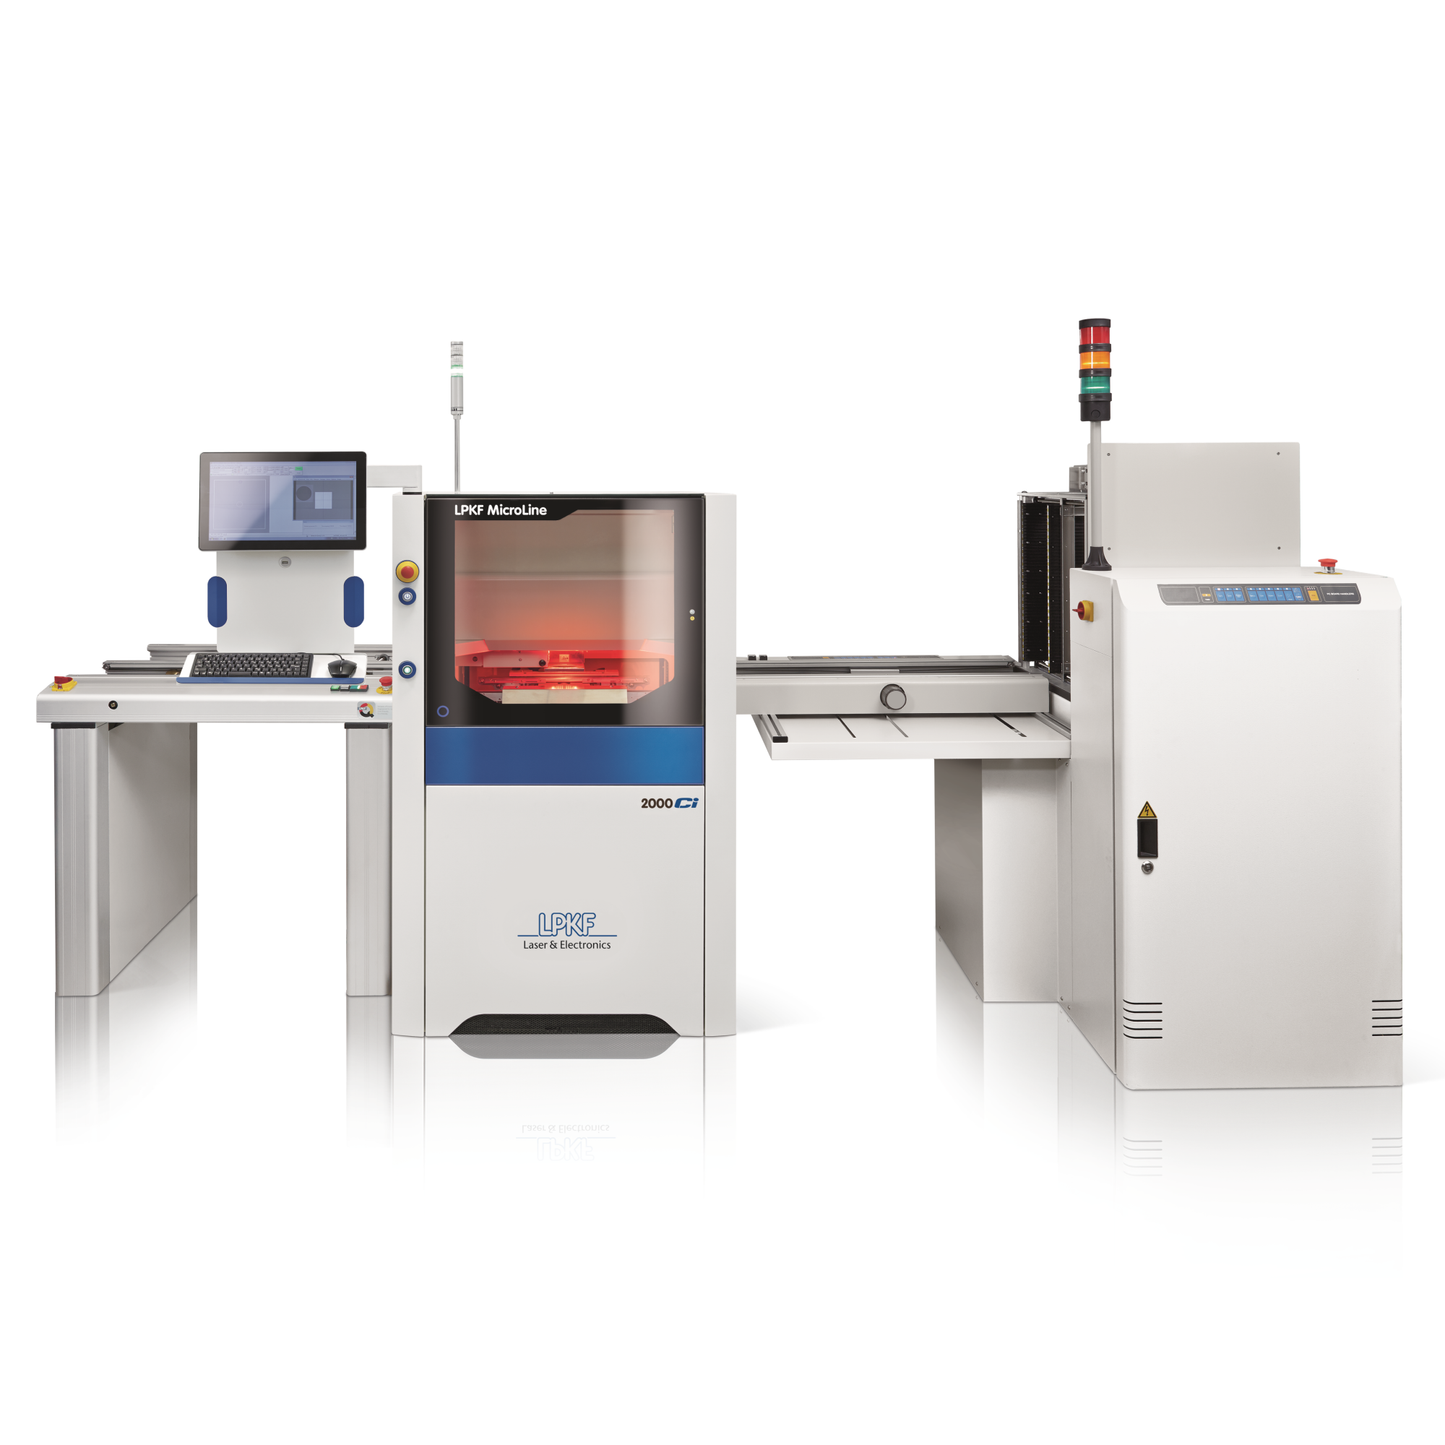 LPKF microline 2000 system pcb laser depaneling solution system compact and cost efficient uv laser